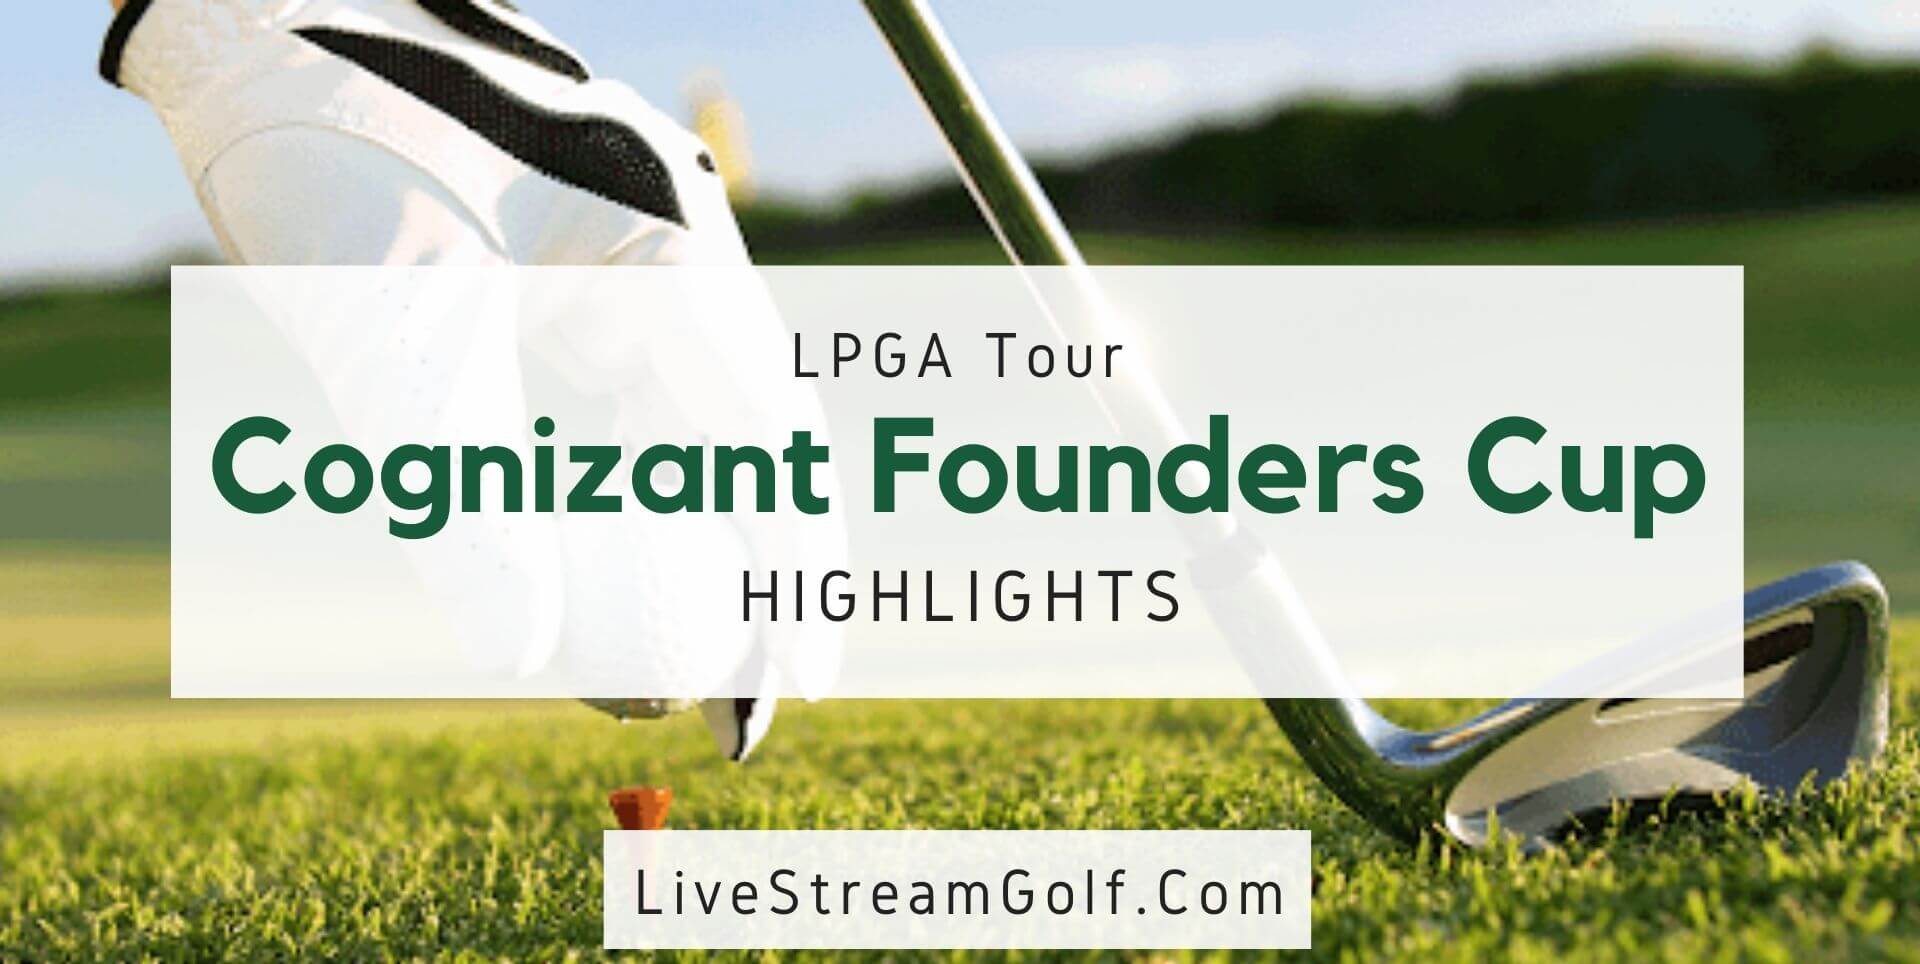 Cognizant Founders Cup Rd 4 Highlights LPGA 2021